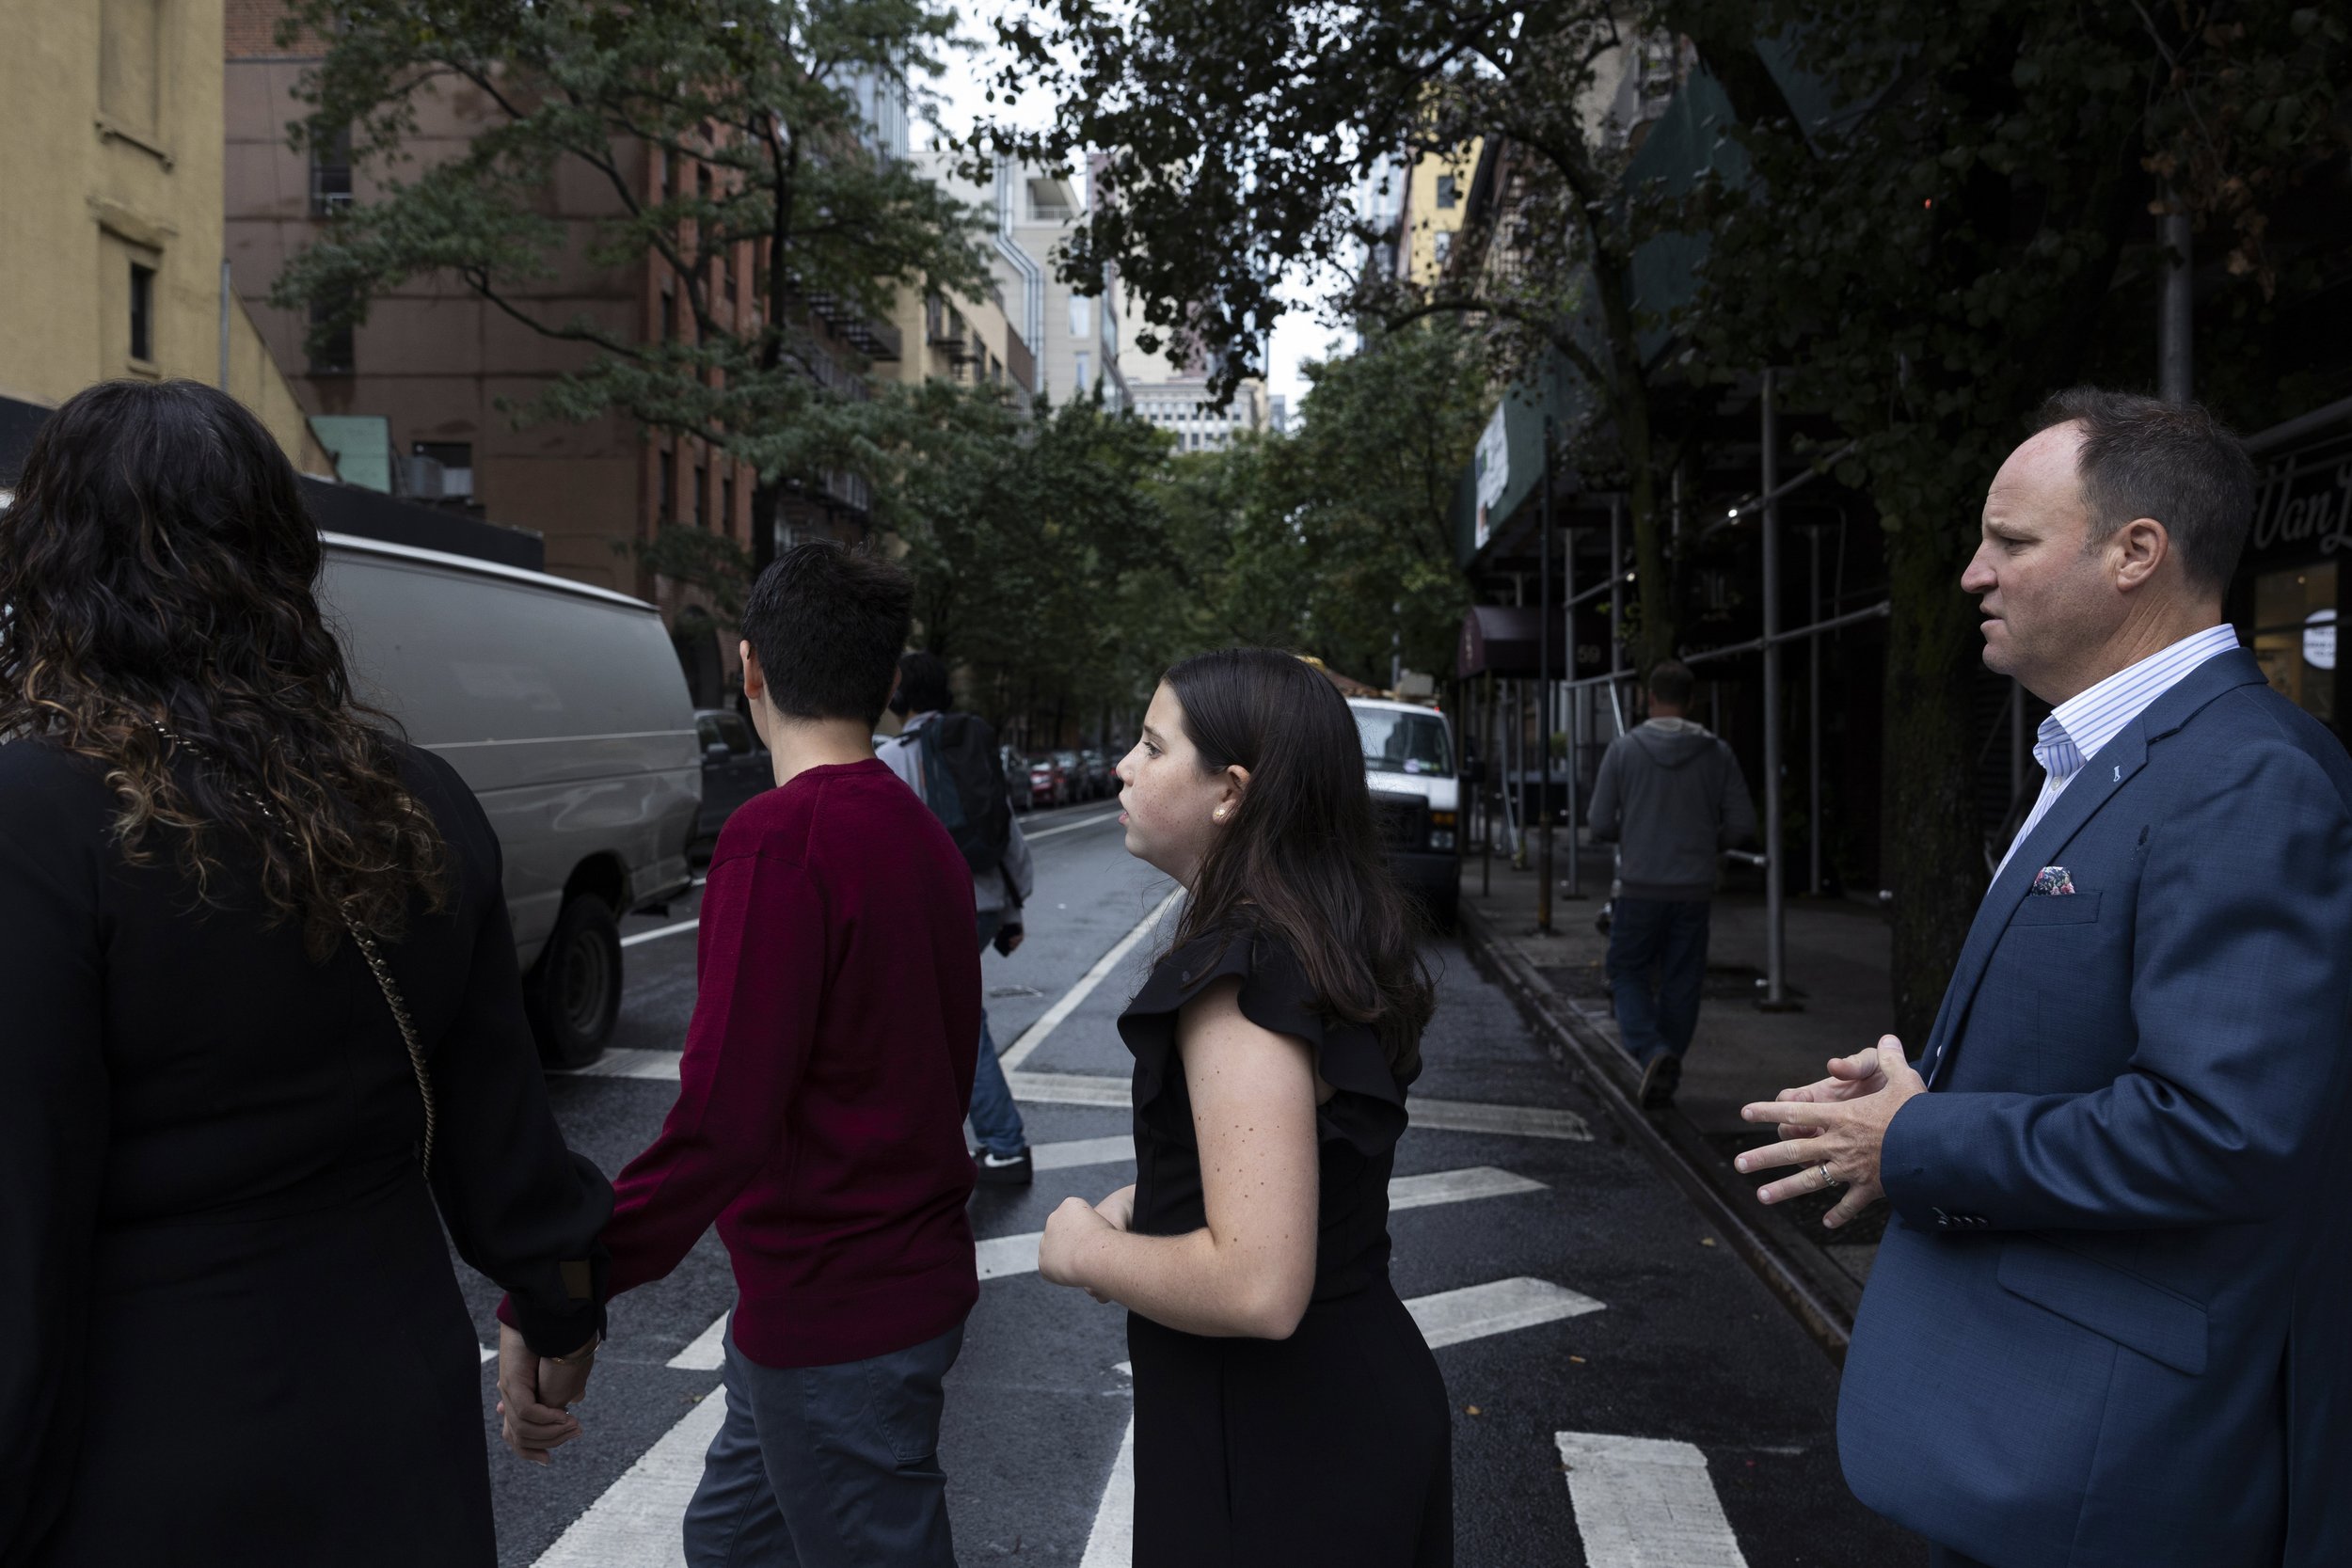  Amelia Goldin (center) walks with her family to Yom Kippur services at their synagogue in Manhattan, New York on October 5, 2022.  